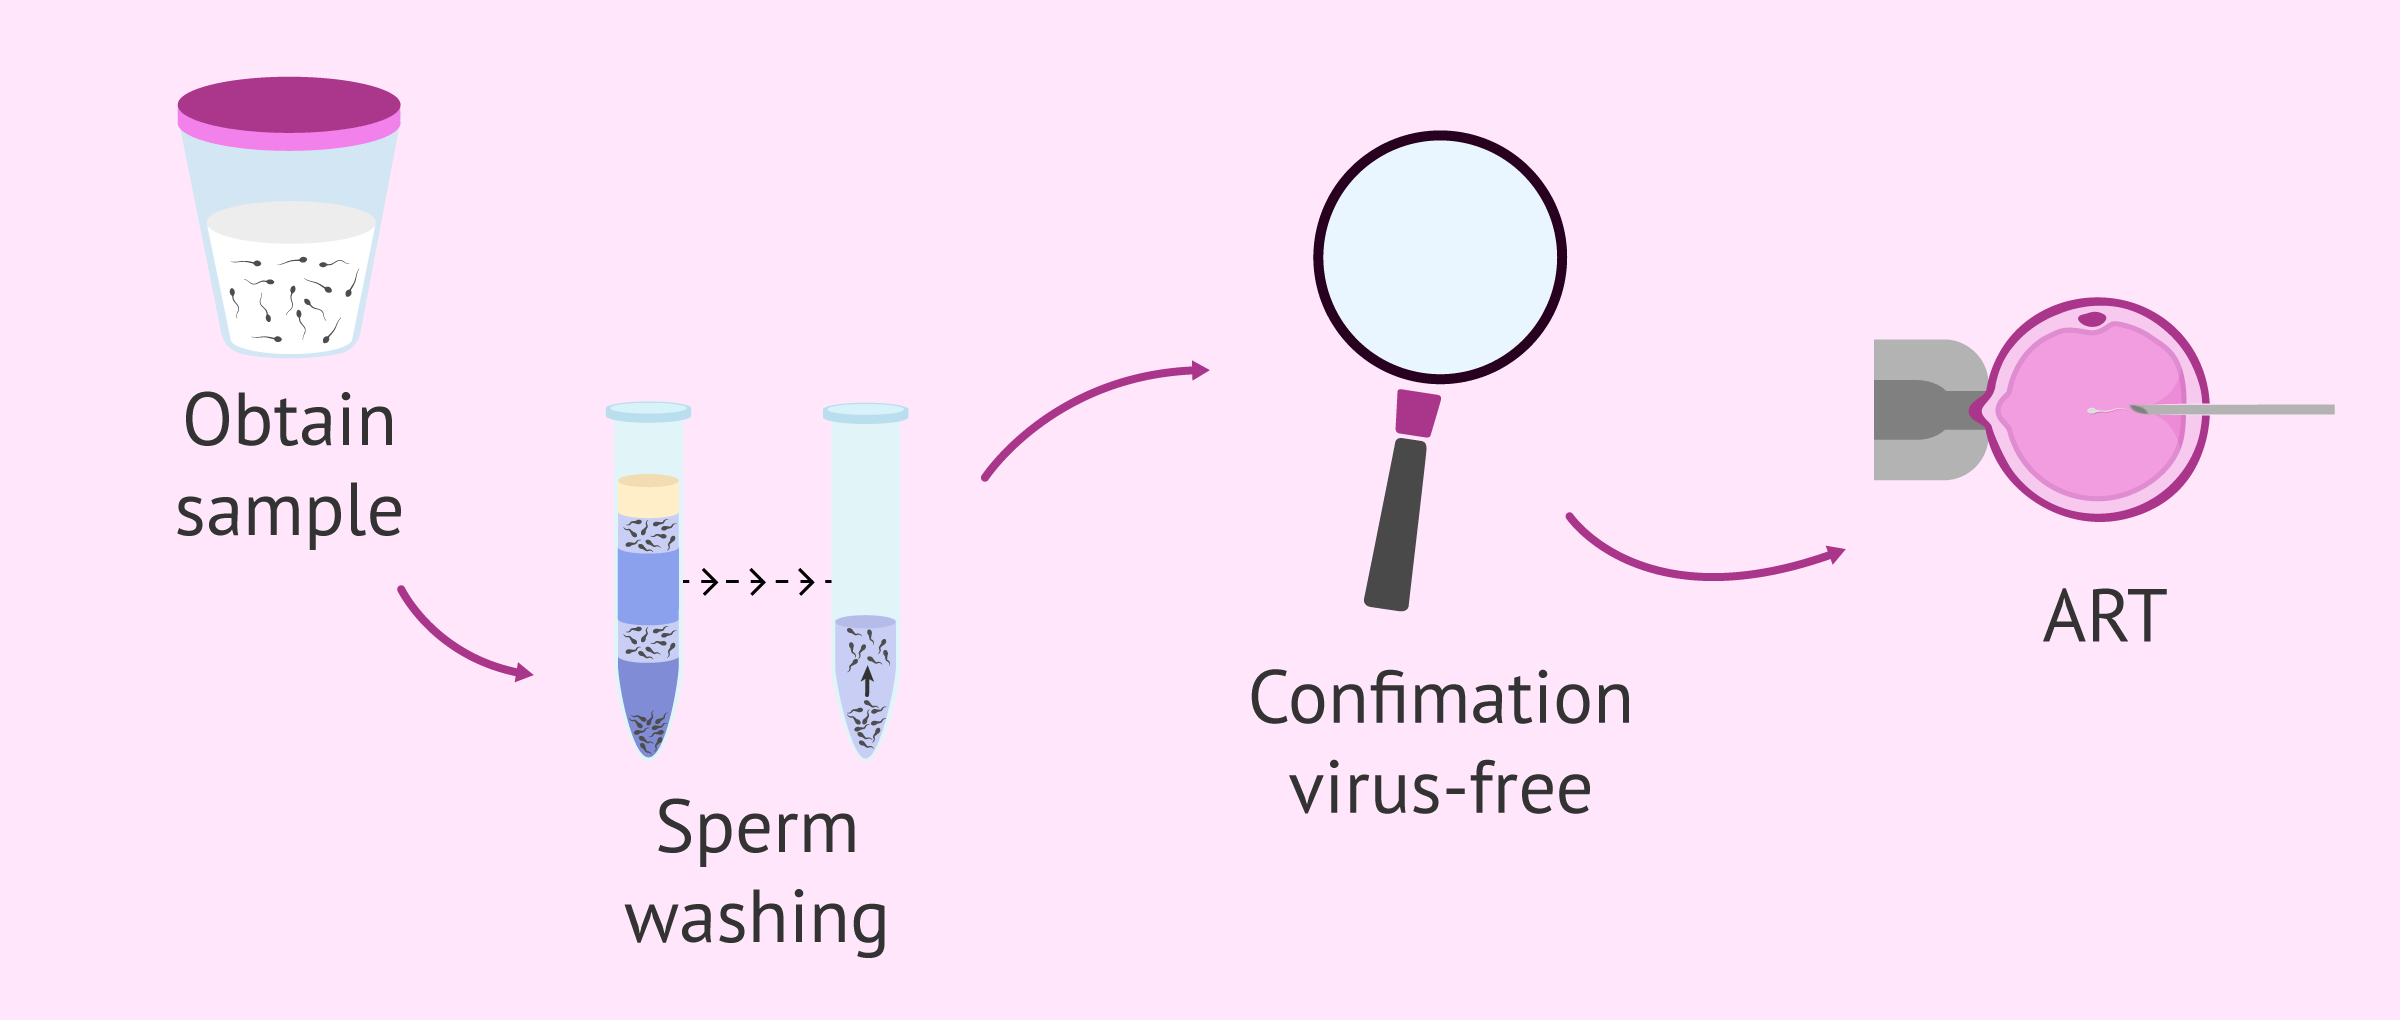 Sperm washing procedure and confirmation of absence of viral